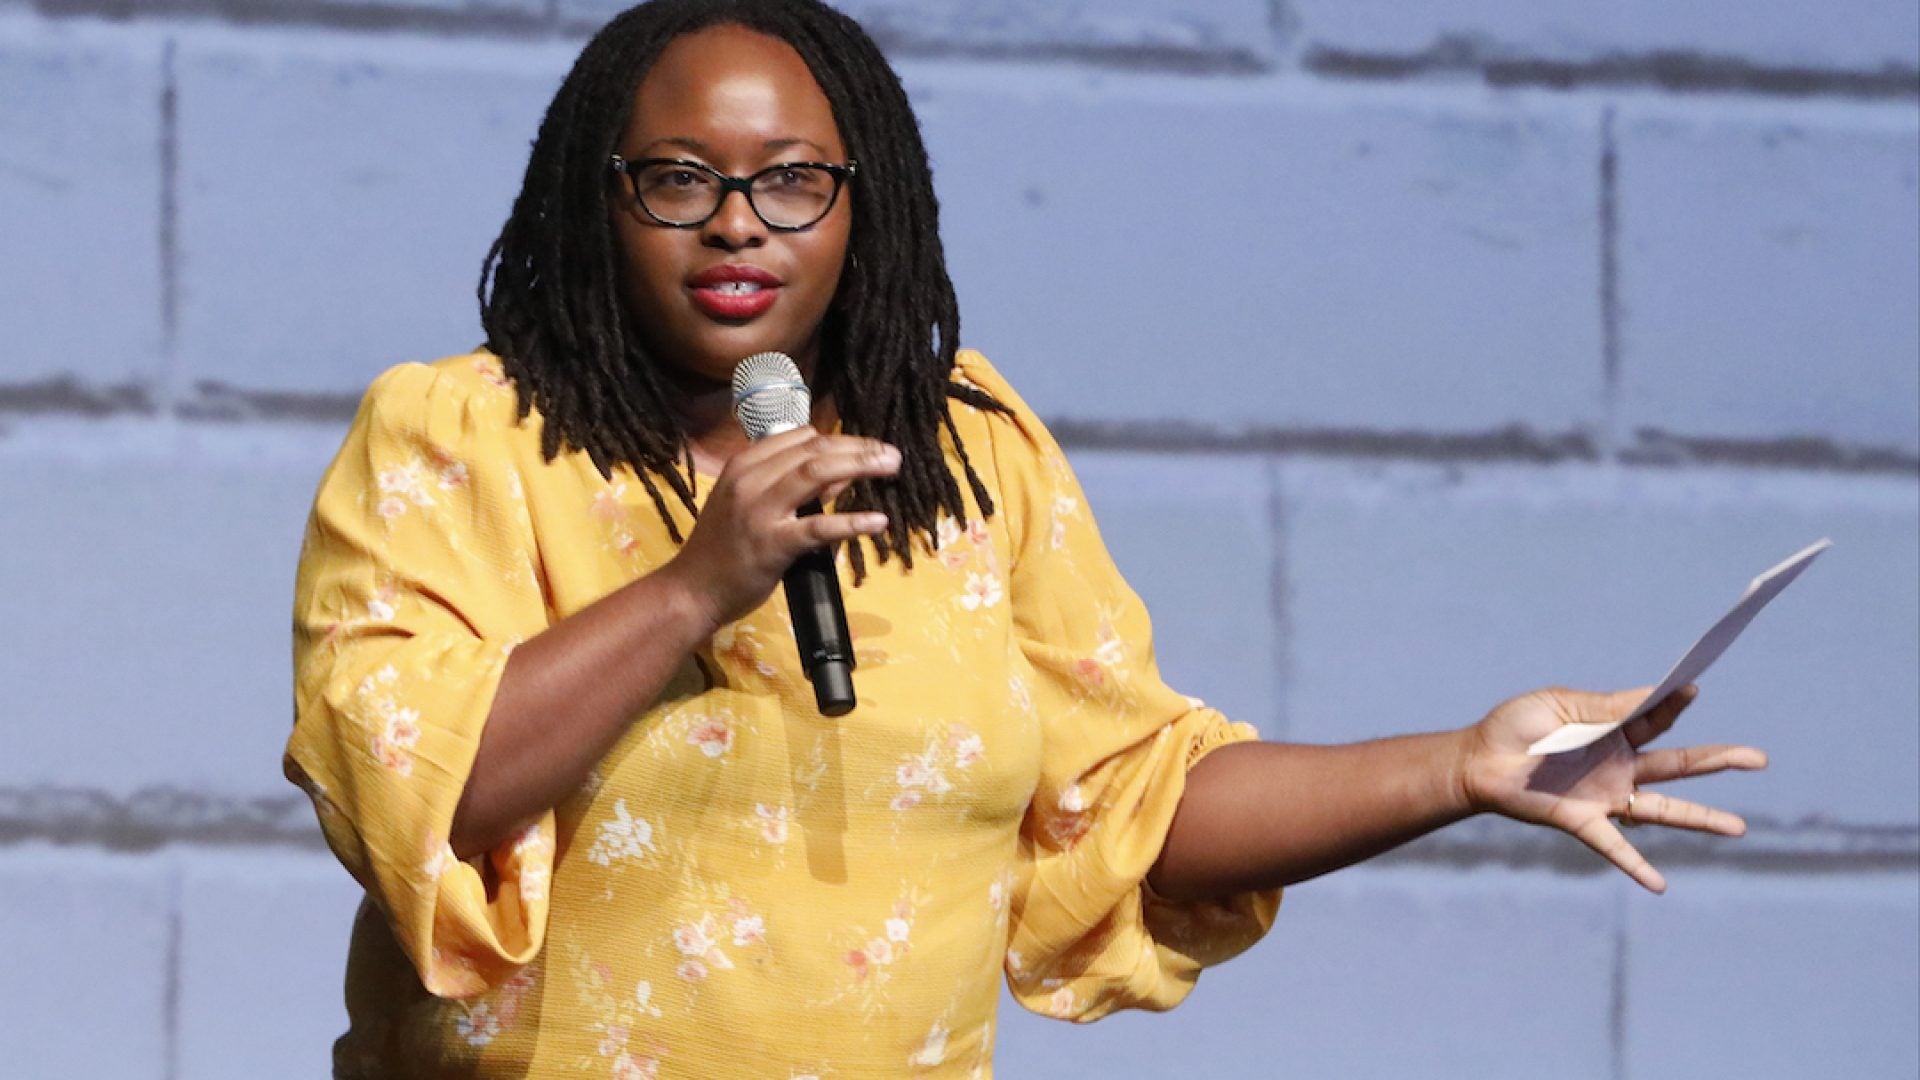 'This Is Us' Writer Kay Oyegun To Adapt Angie Thomas' Novel 'On The Come Up'